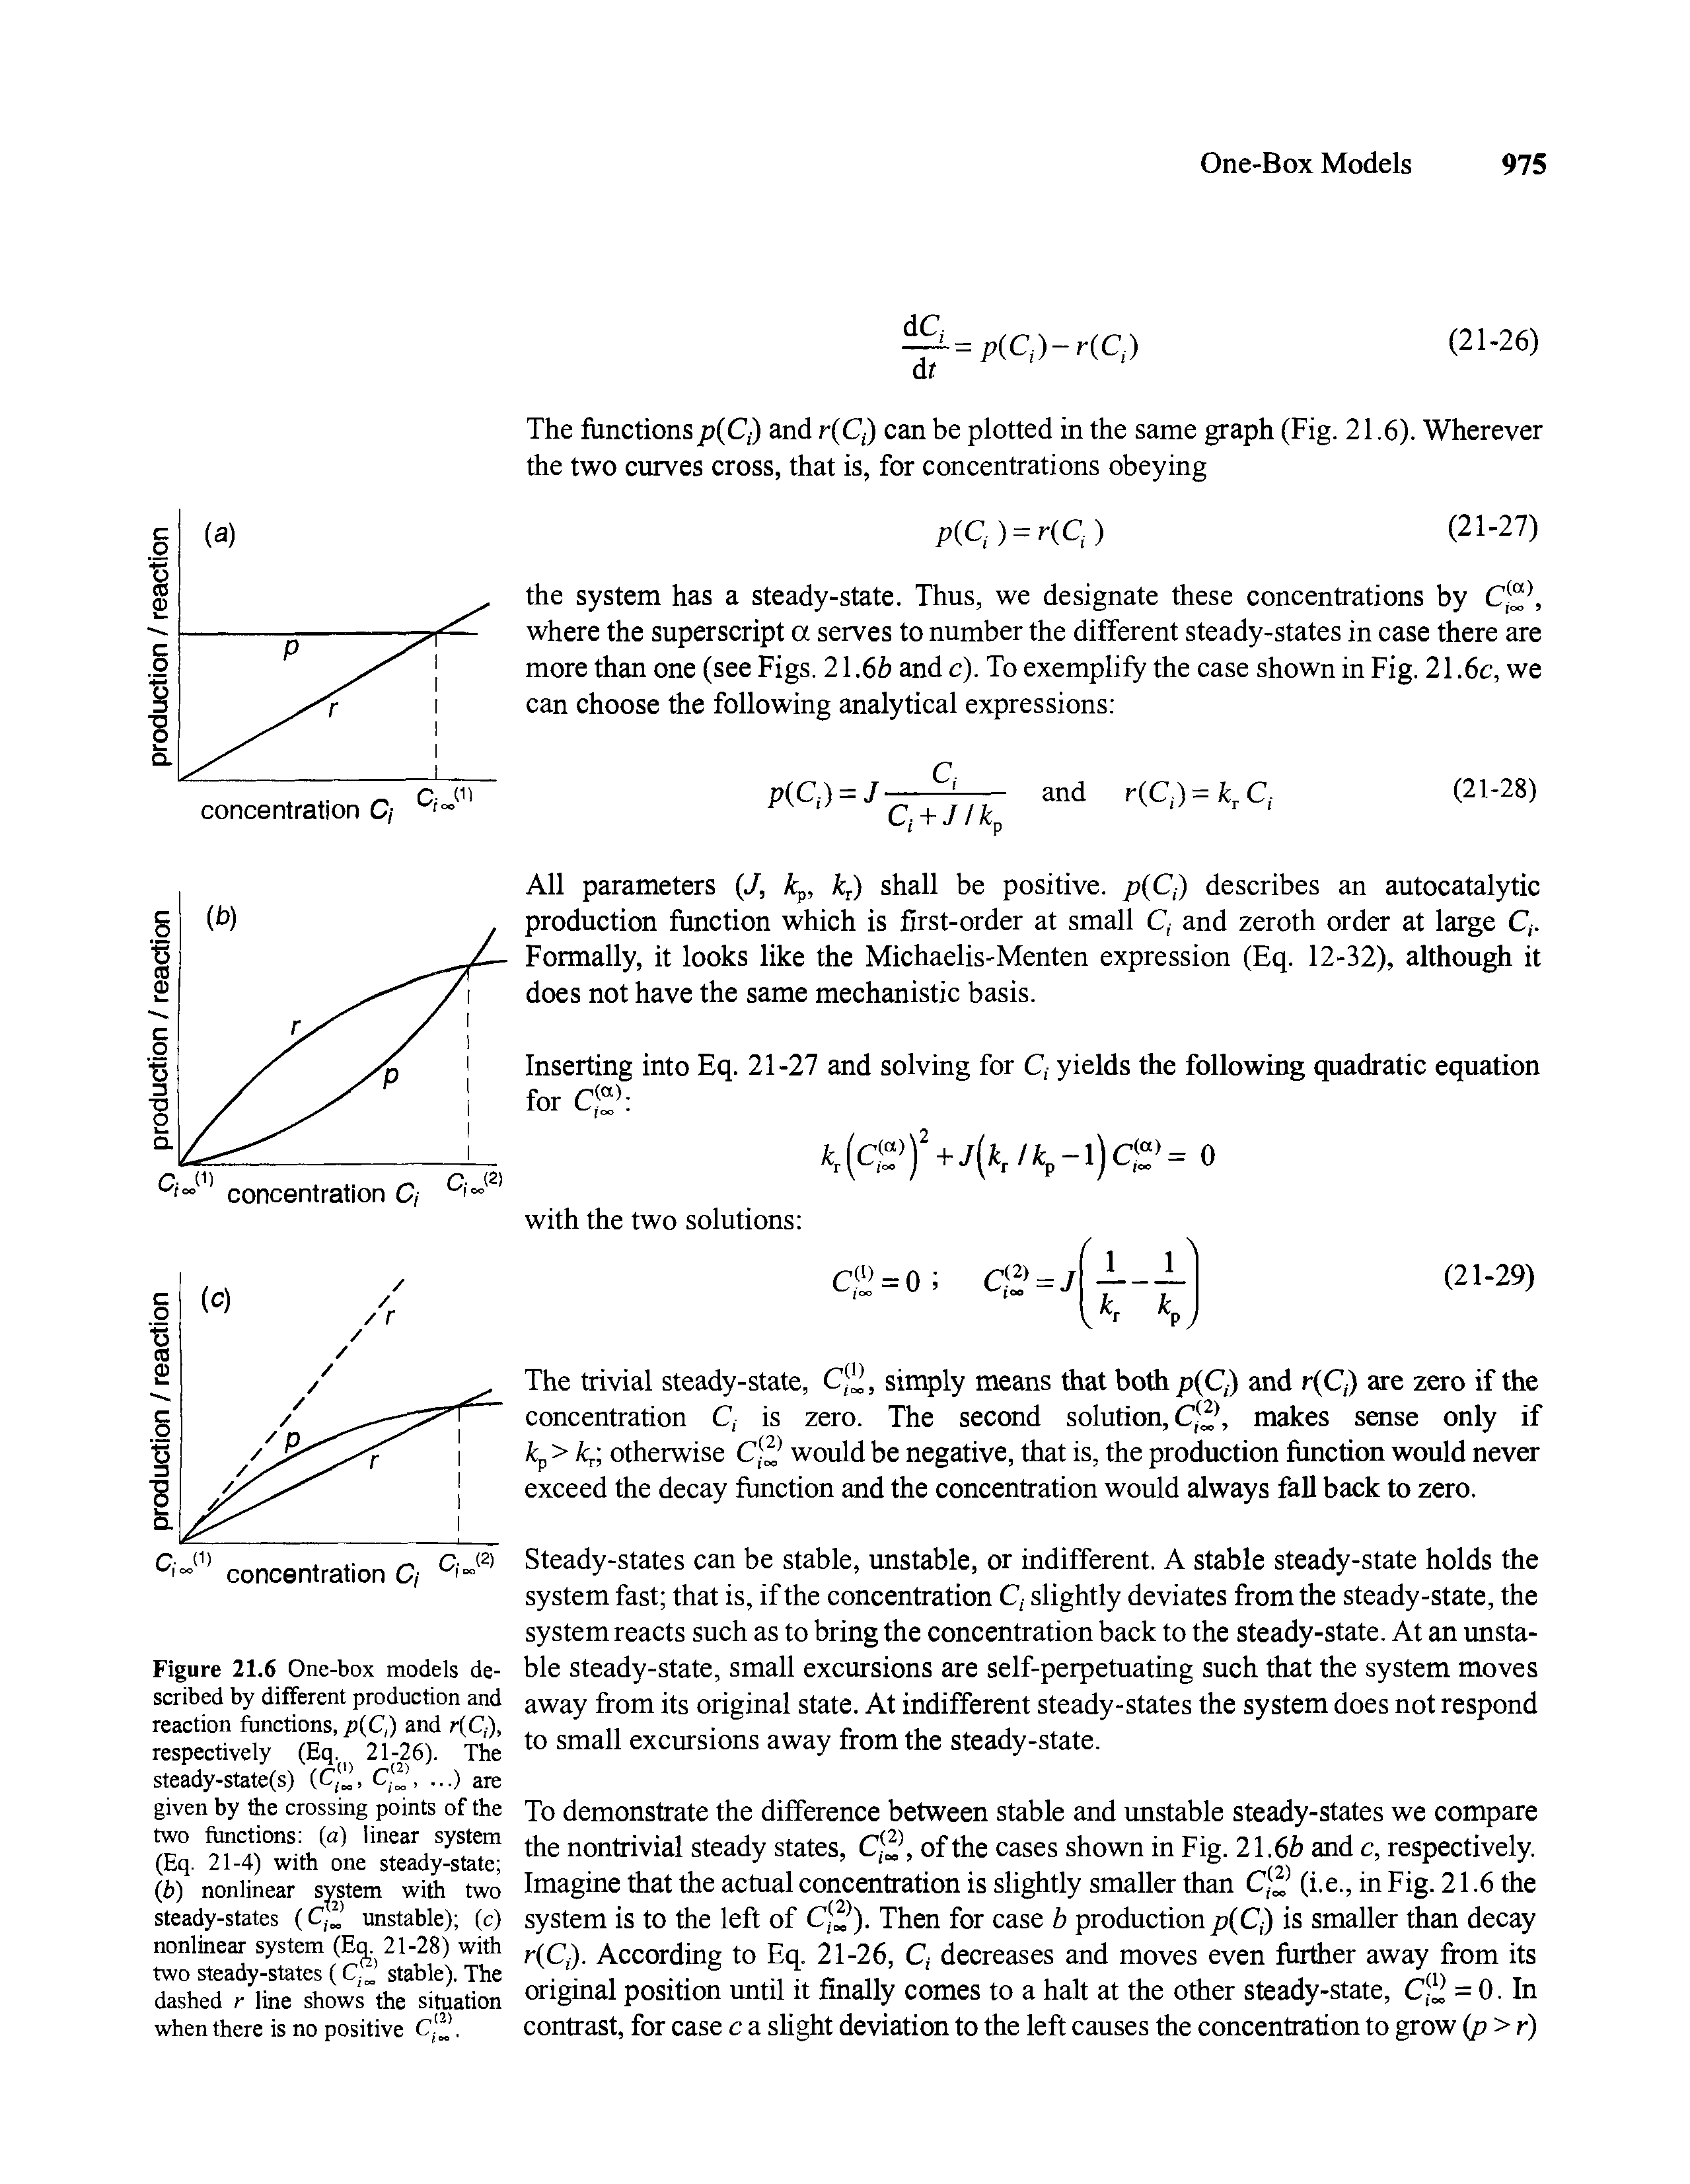 Figure 21.6 One-box models described by different production and reaction functions, p(C,) and r(C,), respectively (Eq. i 21-26). The steady-state(s) (Cf J, CF. ..) are given by the crossing points of the two functions (a) linear system (Eq. 21-4) with one steady-state (b) nonlinear system with two steady-states (Cy unstable) (c) nonlinear system (Eq. 21-28) with two steady-states (Cstable). The dashed r line shows the situation when there is no positive c7 ...